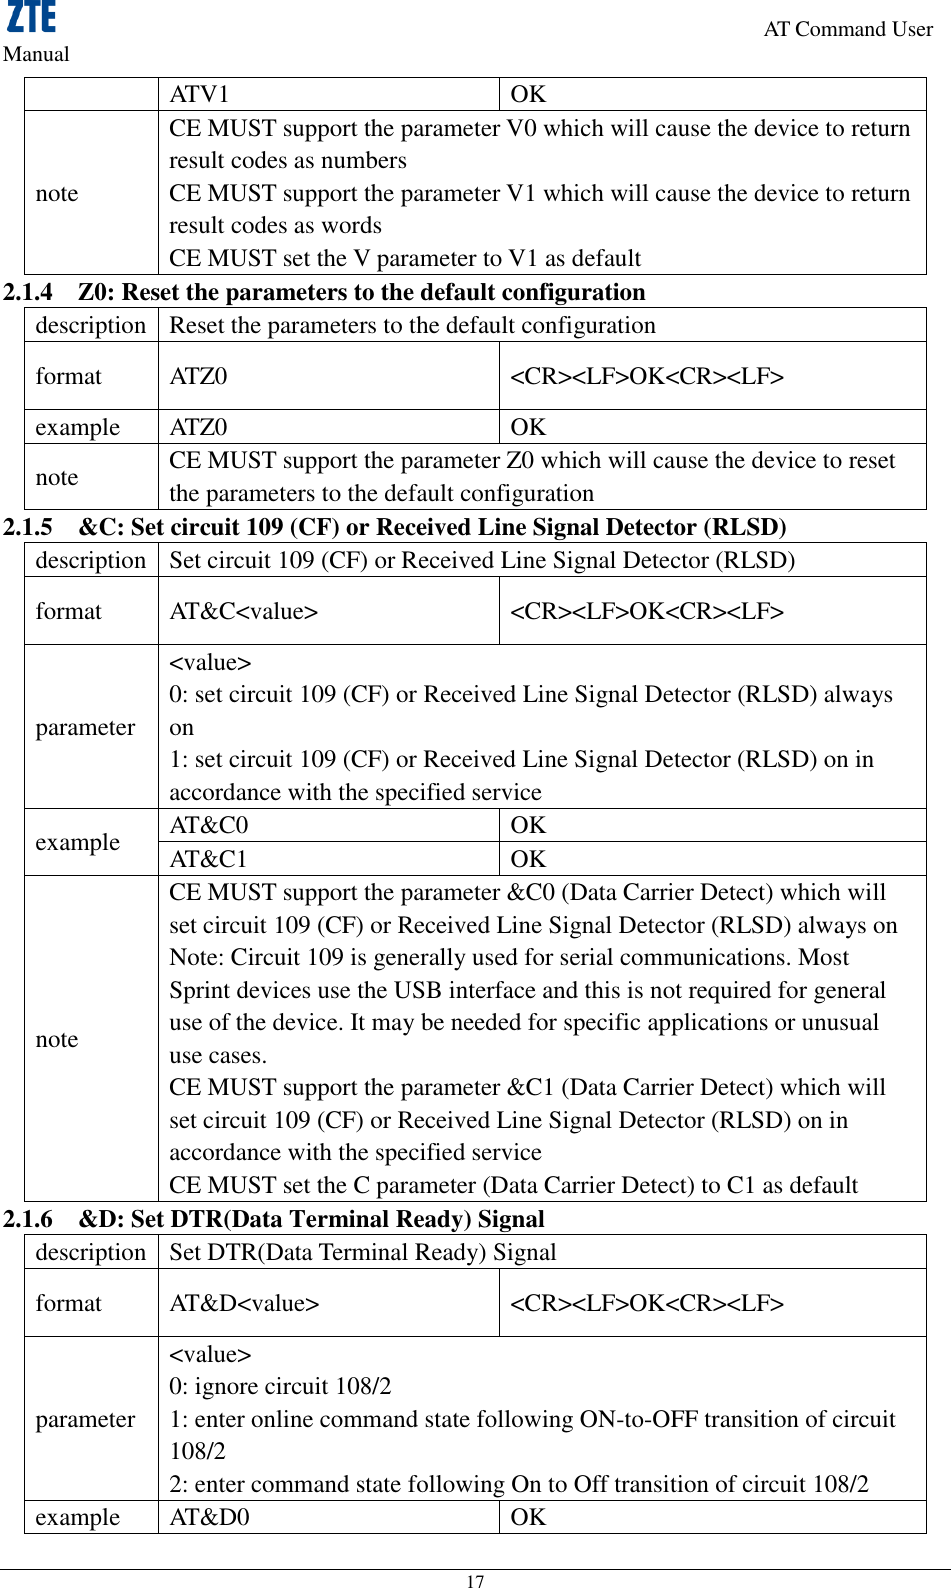                                                                     AT Command User Manual 17 ATV1 OK note CE MUST support the parameter V0 which will cause the device to return result codes as numbers CE MUST support the parameter V1 which will cause the device to return result codes as words   CE MUST set the V parameter to V1 as default 2.1.4 Z0: Reset the parameters to the default configuration description Reset the parameters to the default configuration format ATZ0 &lt;CR&gt;&lt;LF&gt;OK&lt;CR&gt;&lt;LF&gt; example ATZ0 OK note CE MUST support the parameter Z0 which will cause the device to reset the parameters to the default configuration 2.1.5 &amp;C: Set circuit 109 (CF) or Received Line Signal Detector (RLSD) description Set circuit 109 (CF) or Received Line Signal Detector (RLSD) format AT&amp;C&lt;value&gt; &lt;CR&gt;&lt;LF&gt;OK&lt;CR&gt;&lt;LF&gt; parameter &lt;value&gt; 0: set circuit 109 (CF) or Received Line Signal Detector (RLSD) always on   1: set circuit 109 (CF) or Received Line Signal Detector (RLSD) on in accordance with the specified service example AT&amp;C0 OK AT&amp;C1 OK note CE MUST support the parameter &amp;C0 (Data Carrier Detect) which will set circuit 109 (CF) or Received Line Signal Detector (RLSD) always on   Note: Circuit 109 is generally used for serial communications. Most Sprint devices use the USB interface and this is not required for general use of the device. It may be needed for specific applications or unusual use cases. CE MUST support the parameter &amp;C1 (Data Carrier Detect) which will set circuit 109 (CF) or Received Line Signal Detector (RLSD) on in accordance with the specified service   CE MUST set the C parameter (Data Carrier Detect) to C1 as default 2.1.6 &amp;D: Set DTR(Data Terminal Ready) Signal description Set DTR(Data Terminal Ready) Signal format AT&amp;D&lt;value&gt; &lt;CR&gt;&lt;LF&gt;OK&lt;CR&gt;&lt;LF&gt; parameter &lt;value&gt; 0: ignore circuit 108/2   1: enter online command state following ON-to-OFF transition of circuit 108/2   2: enter command state following On to Off transition of circuit 108/2 example AT&amp;D0 OK 